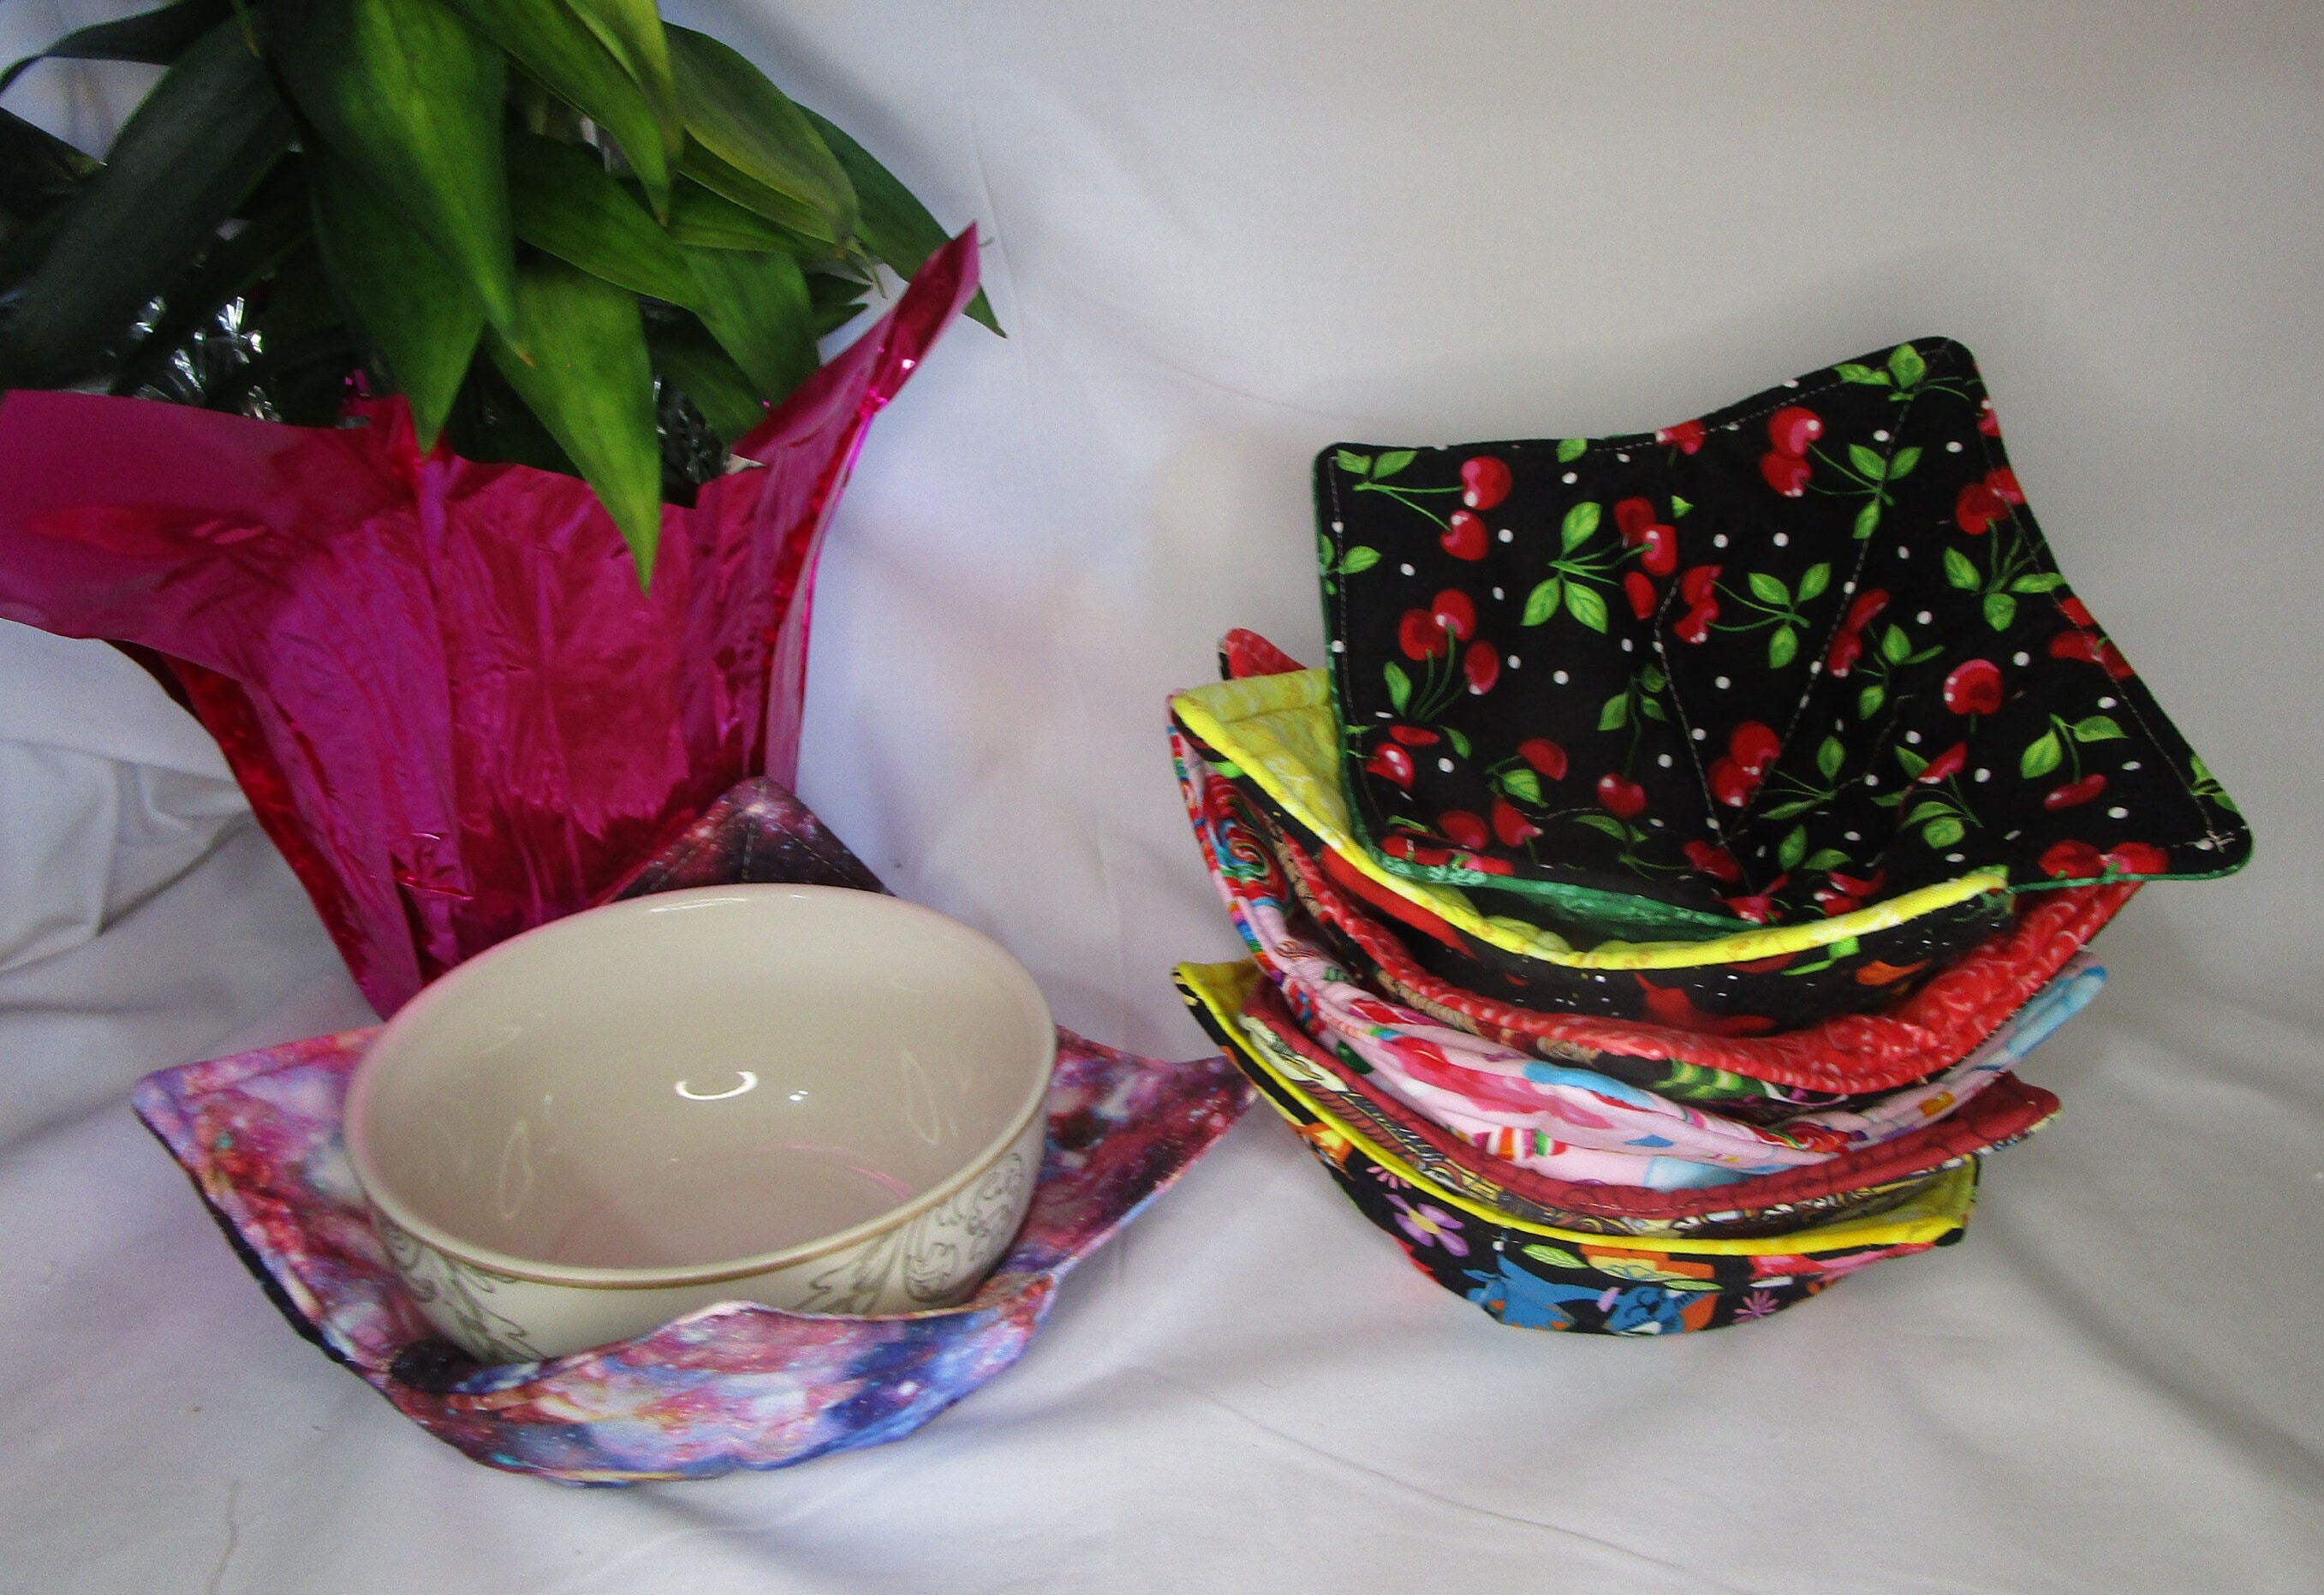 DIY Holiday Projects - How to make a Microwavable Bowl Cozy